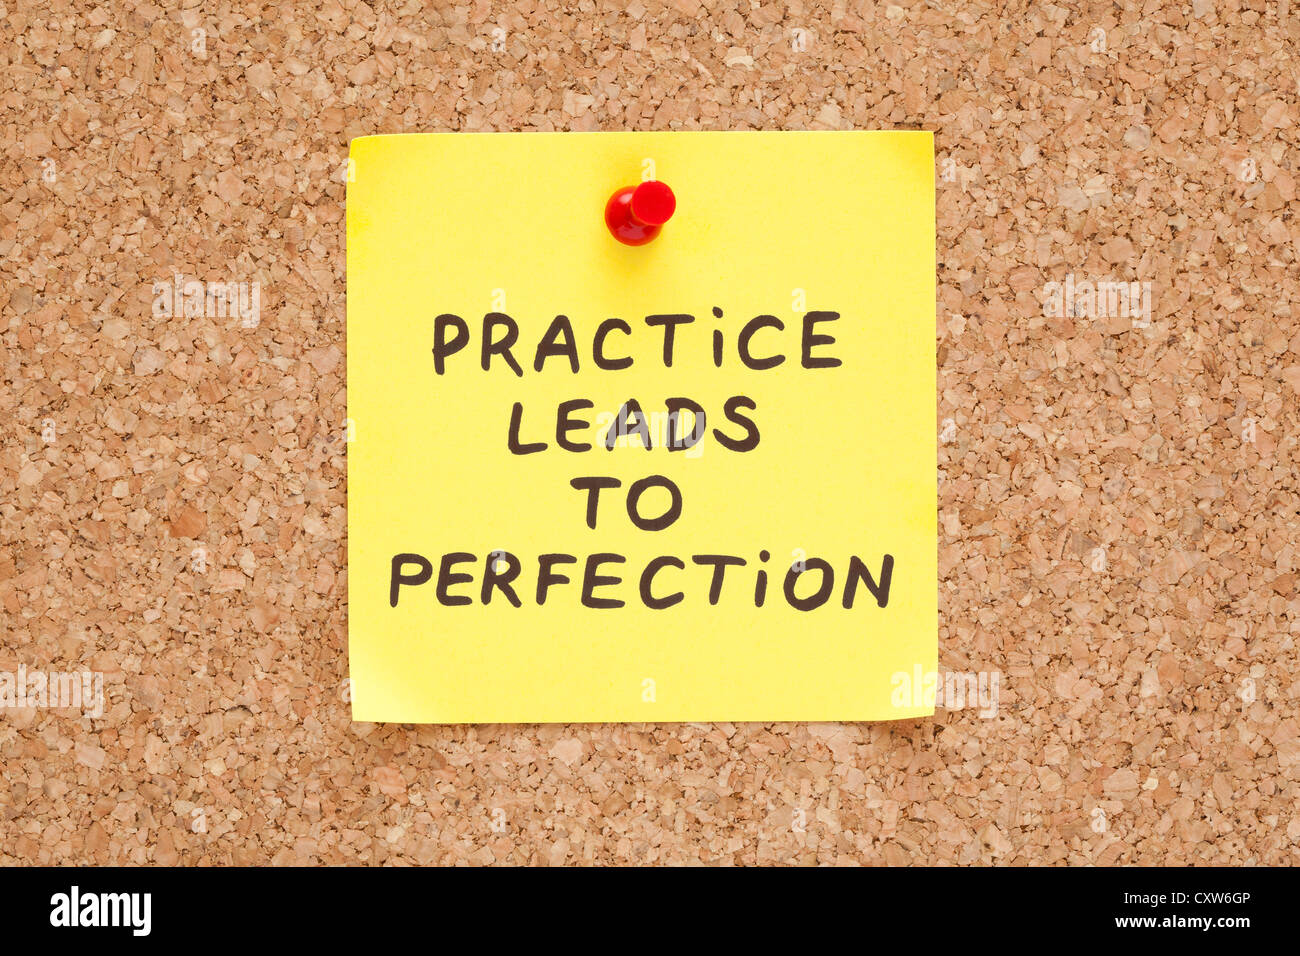 Practice leads to perfection, written on an yellow sticky note on a cork bulletin board Stock Photo